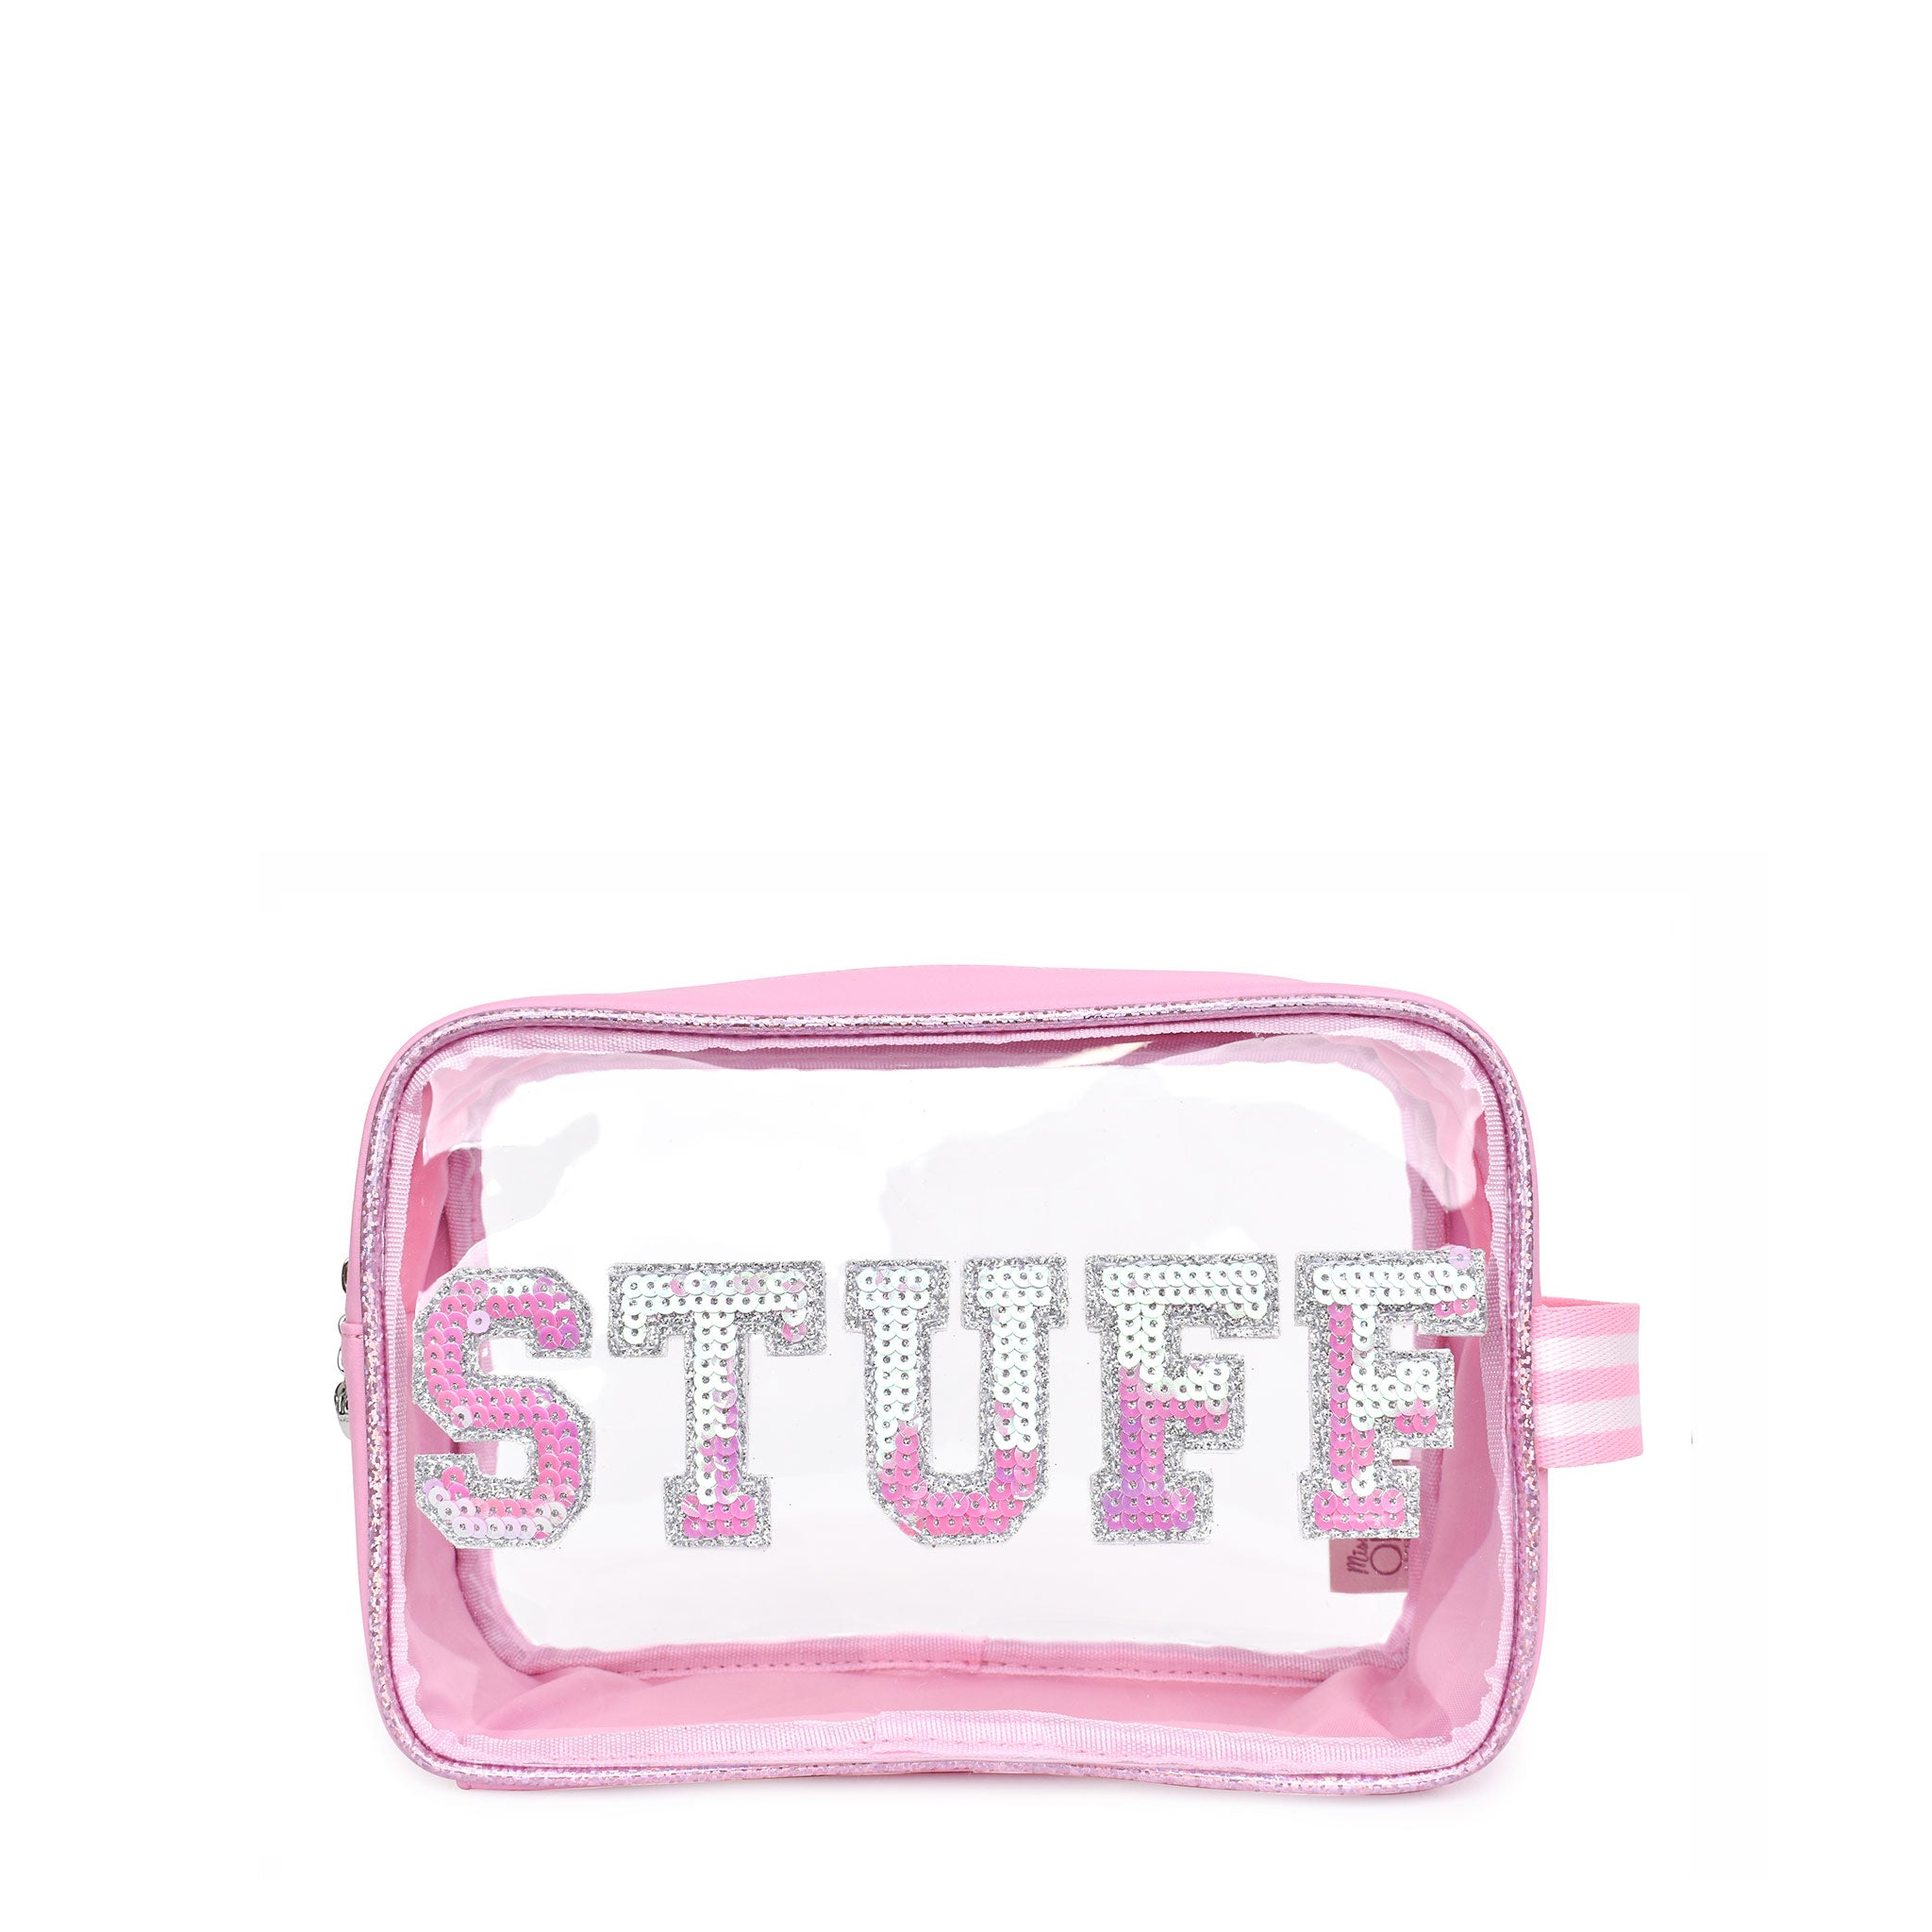 Front view of a clear pouch with pink sequin varsity letters 'STUFF'